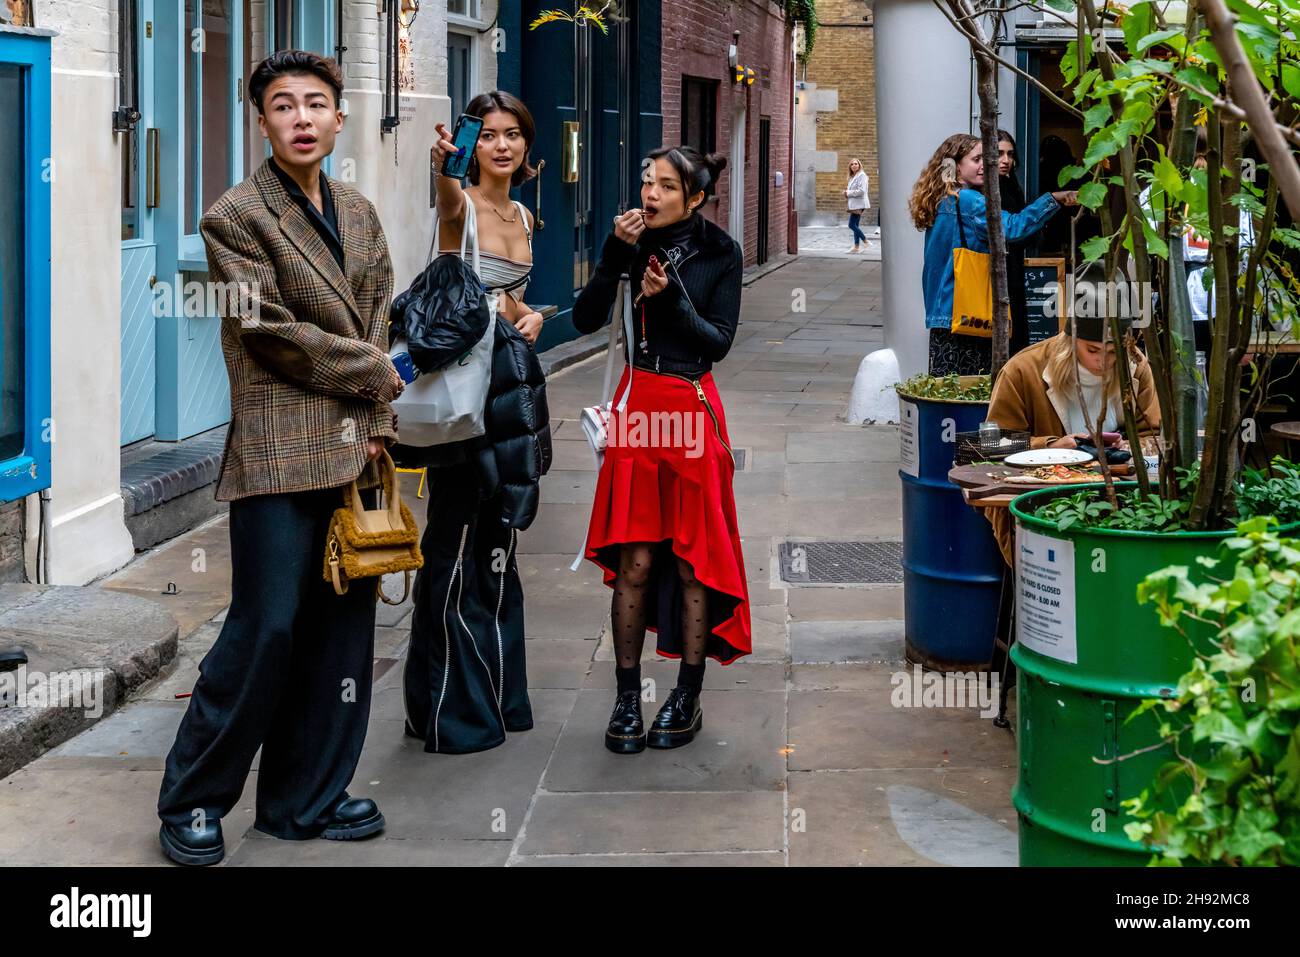 A Group Of Young Asian Visitors In Neal’s Yard, Covent Garden, London, UK. Stock Photo